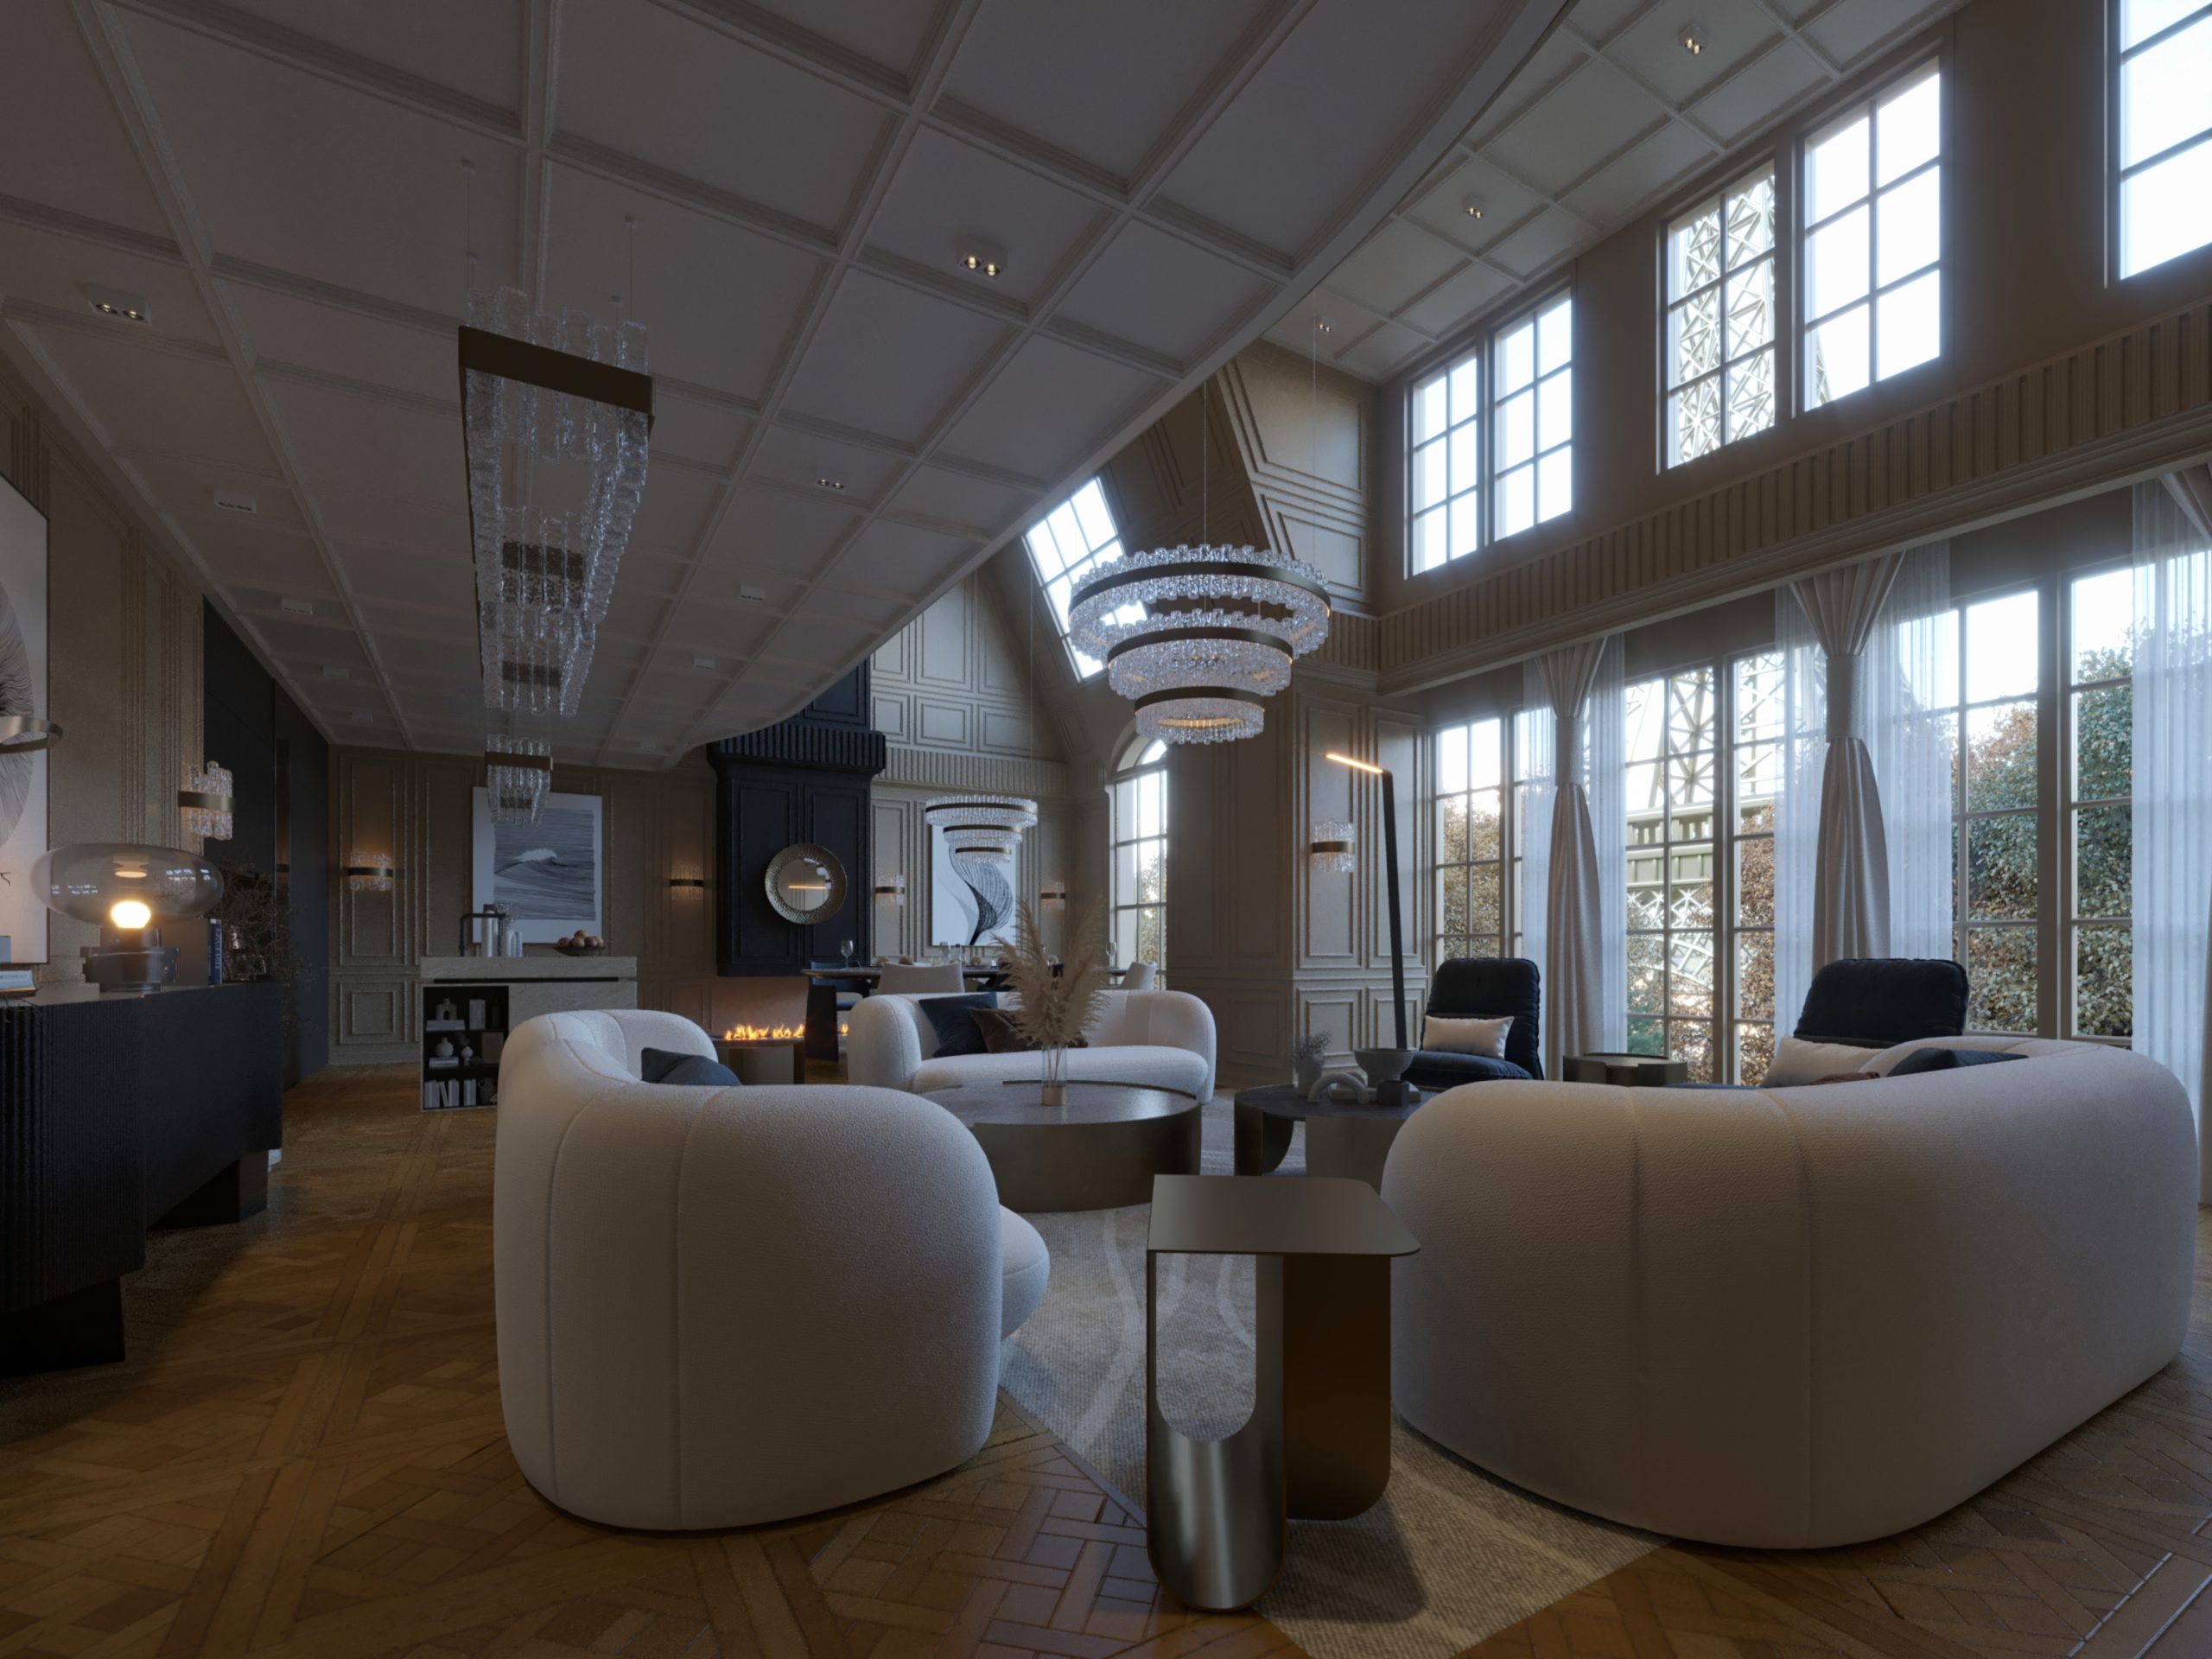 new classic theme - sitting area - ceiling decoration - render setting - sofa